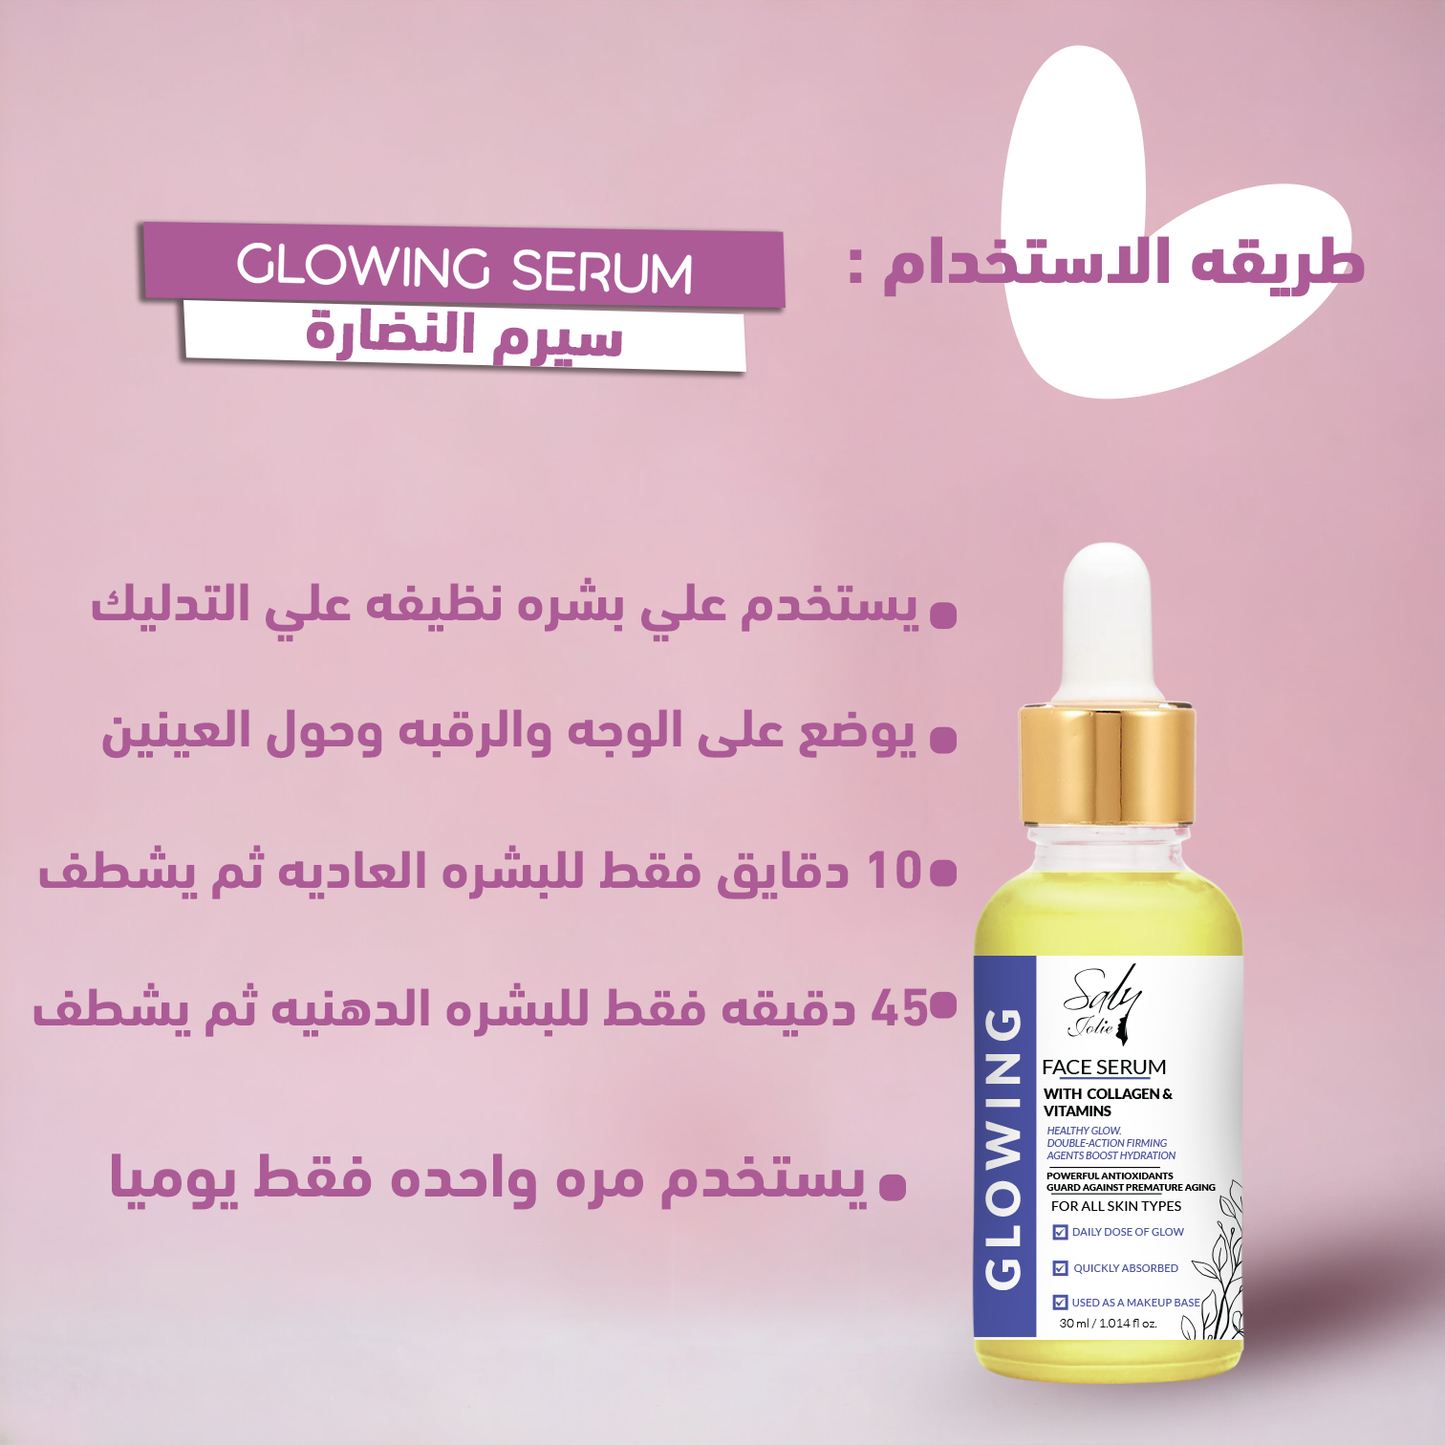 Organic Glowing Collagen and Vitamins Serum for the face and neck, quickly absorbed